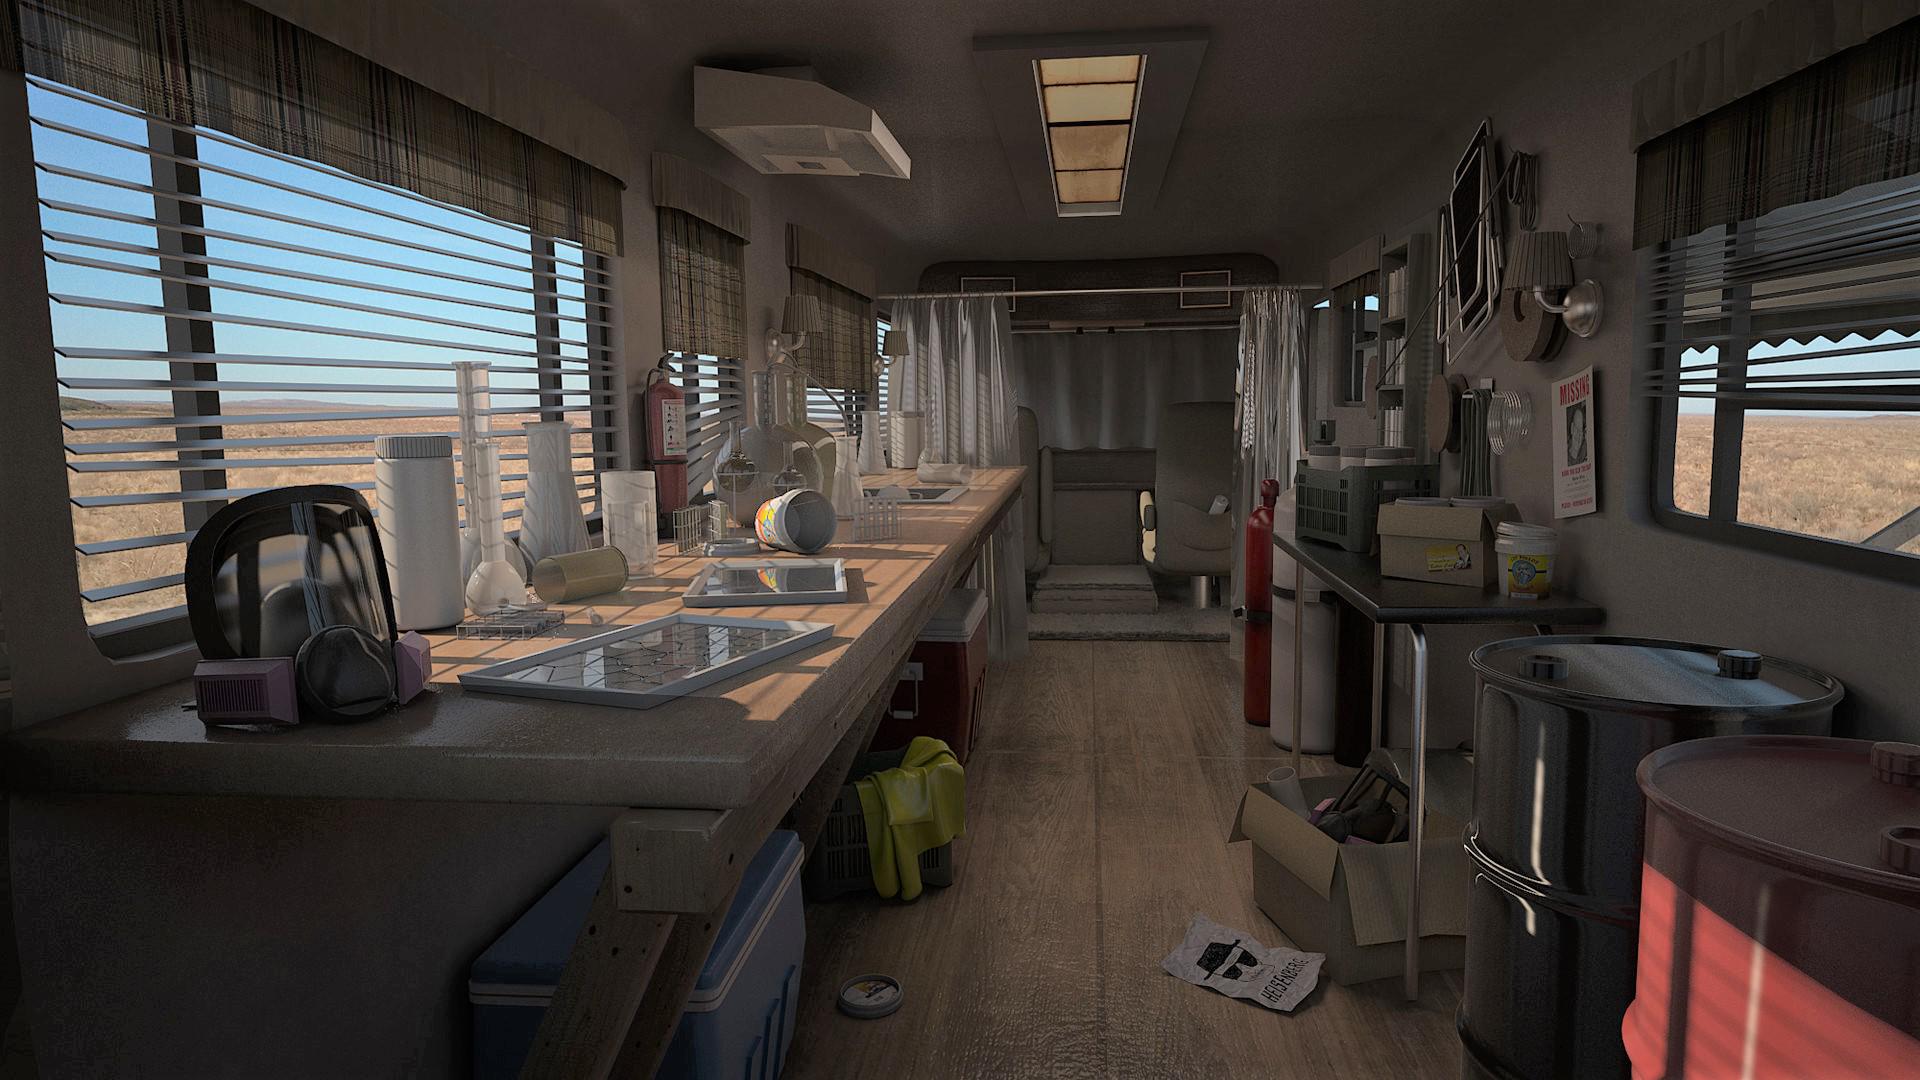 Breaking Bad RV interior. Virtual background to use on Zoom, Microsoft Teams, Skype, Google Meet, WebEx or any other compatible app.